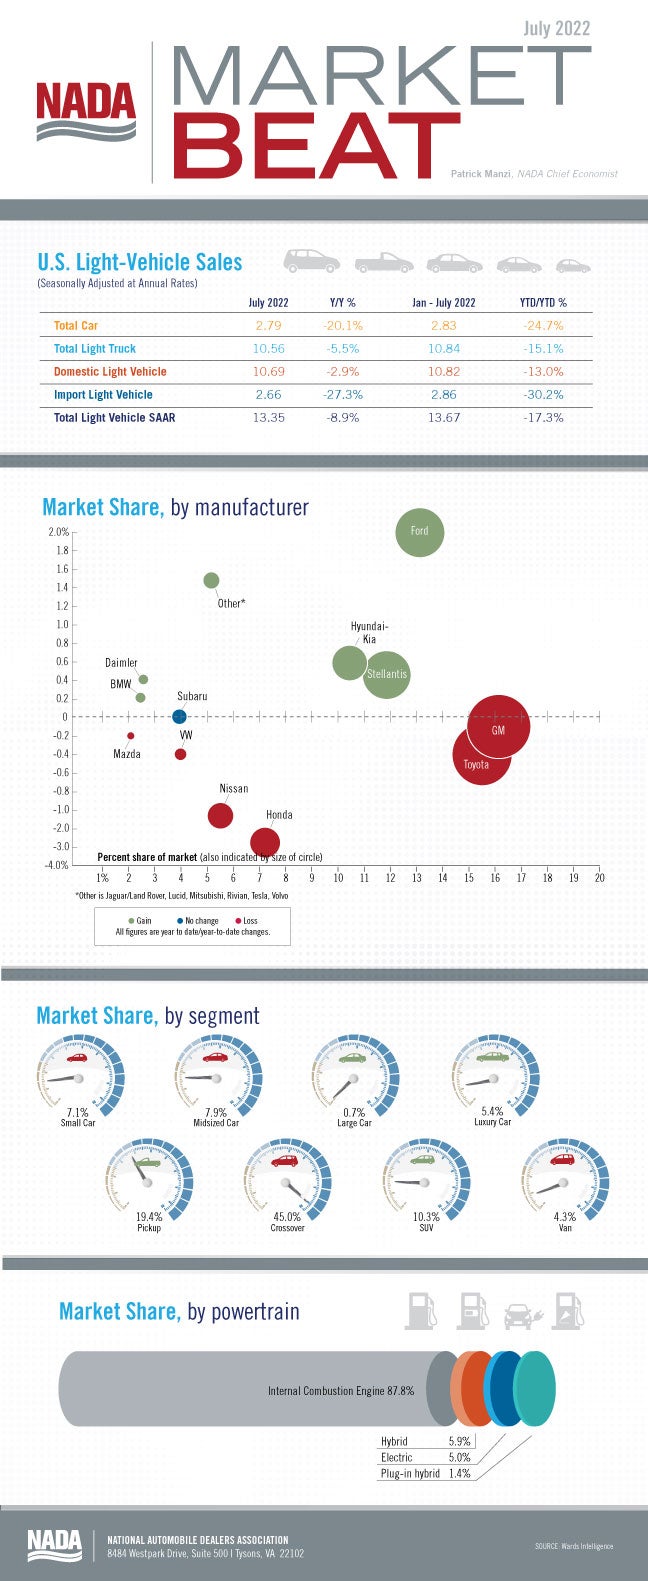 Market Beat July 2022 infographic